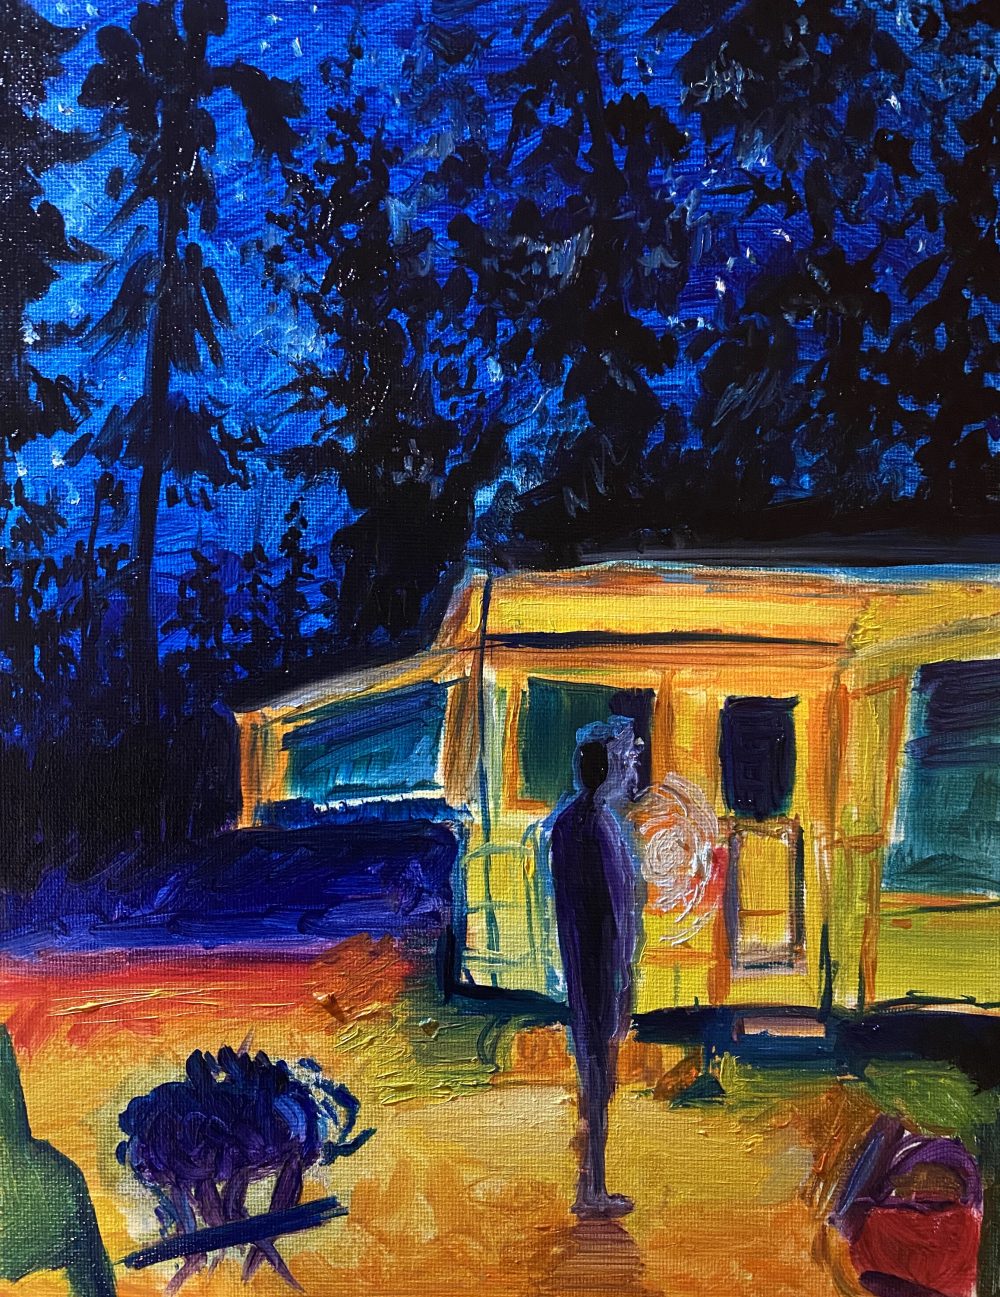 An abstract camper at dusk with a silhouette of a man. Blues and warm colors.